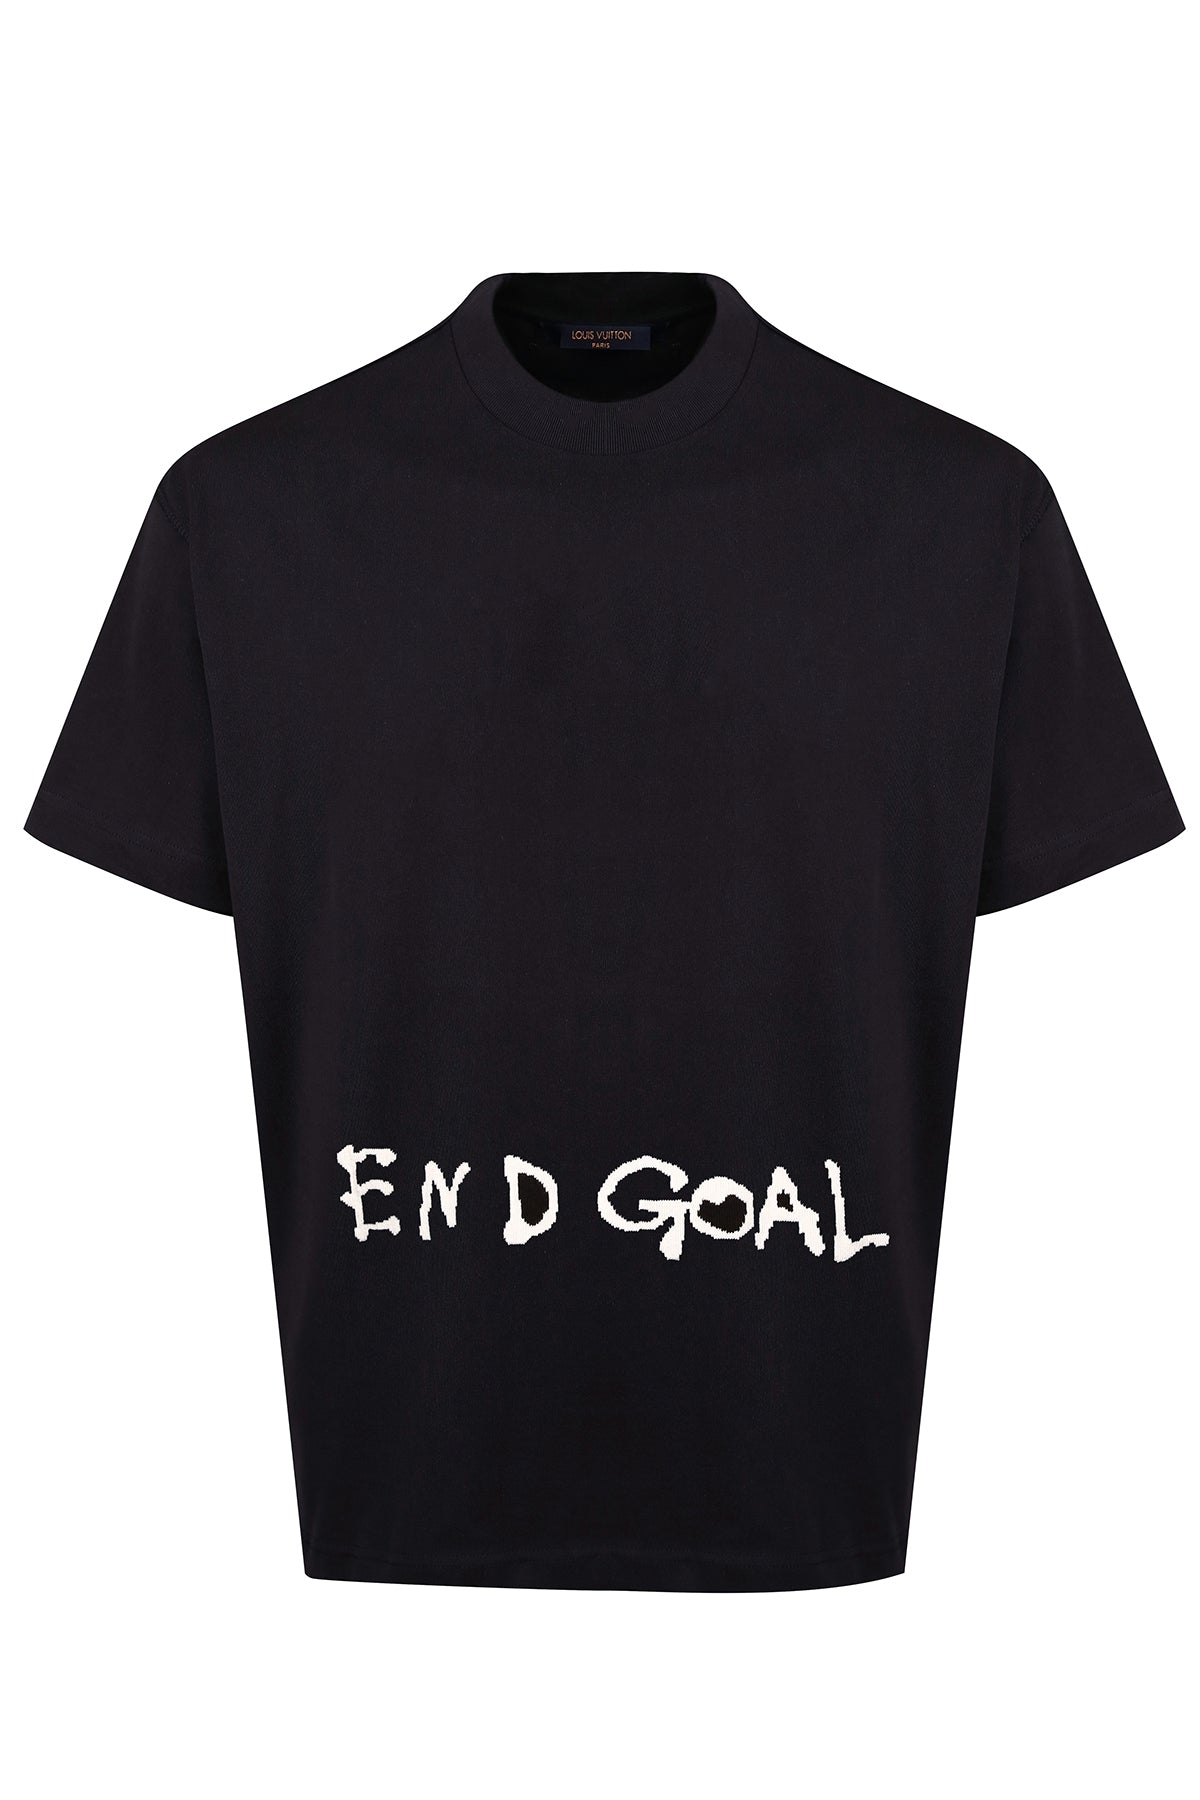 Buy Louis Vuitton 21AW End Goal Tee End Goal Print Cotton Short Sleeve T- shirt Cut and Sewn Black HLY84W L Black from Japan - Buy authentic Plus  exclusive items from Japan